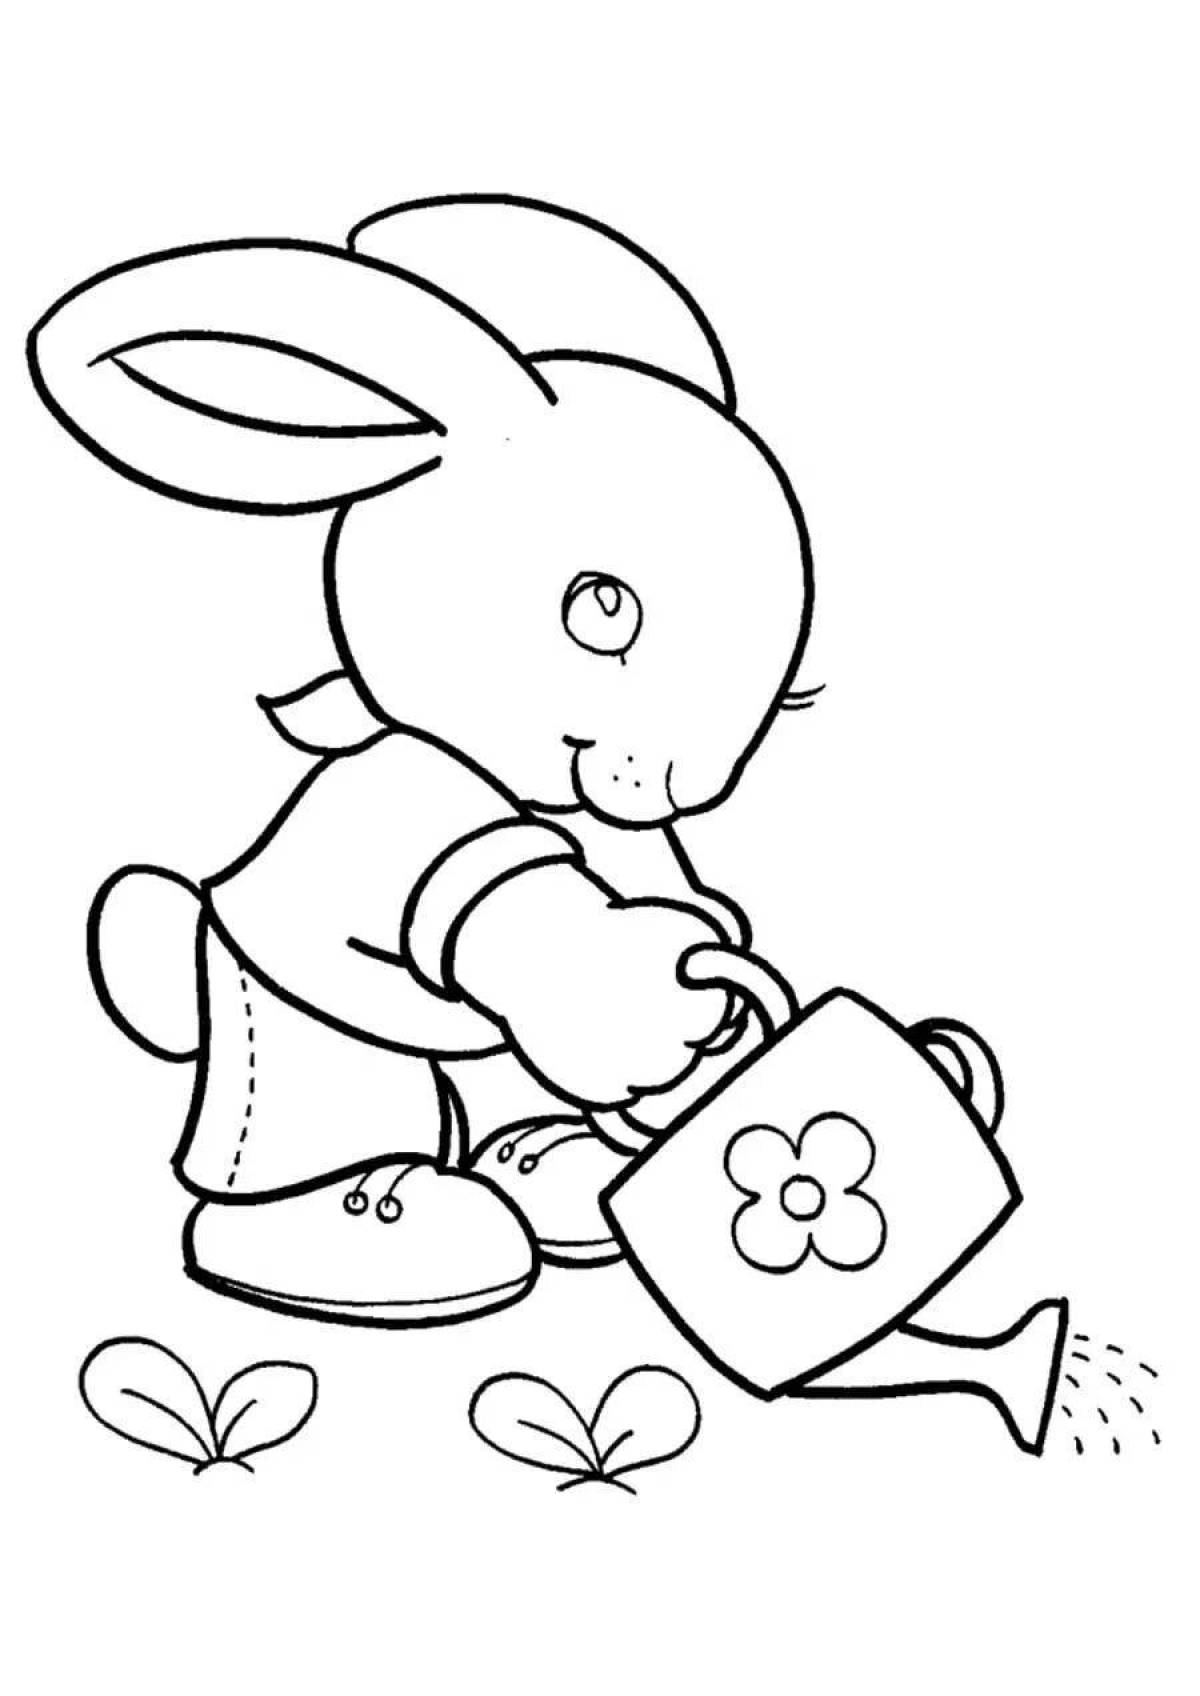 Coloring page funny hare for girls